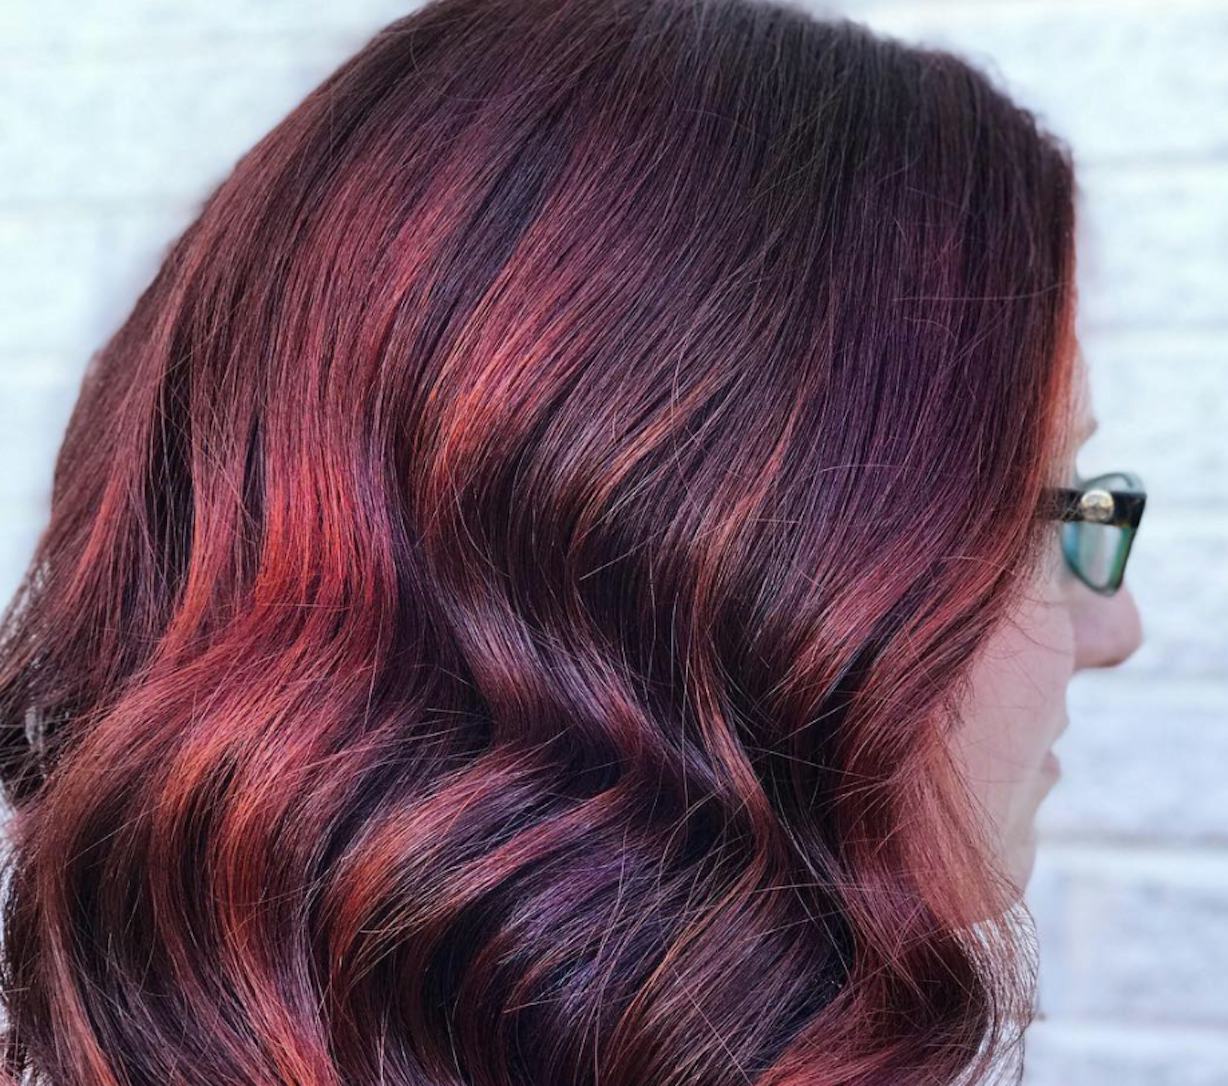 Mulled Wine Hair Is The Latest Winter Hair Color Trend & It's ...